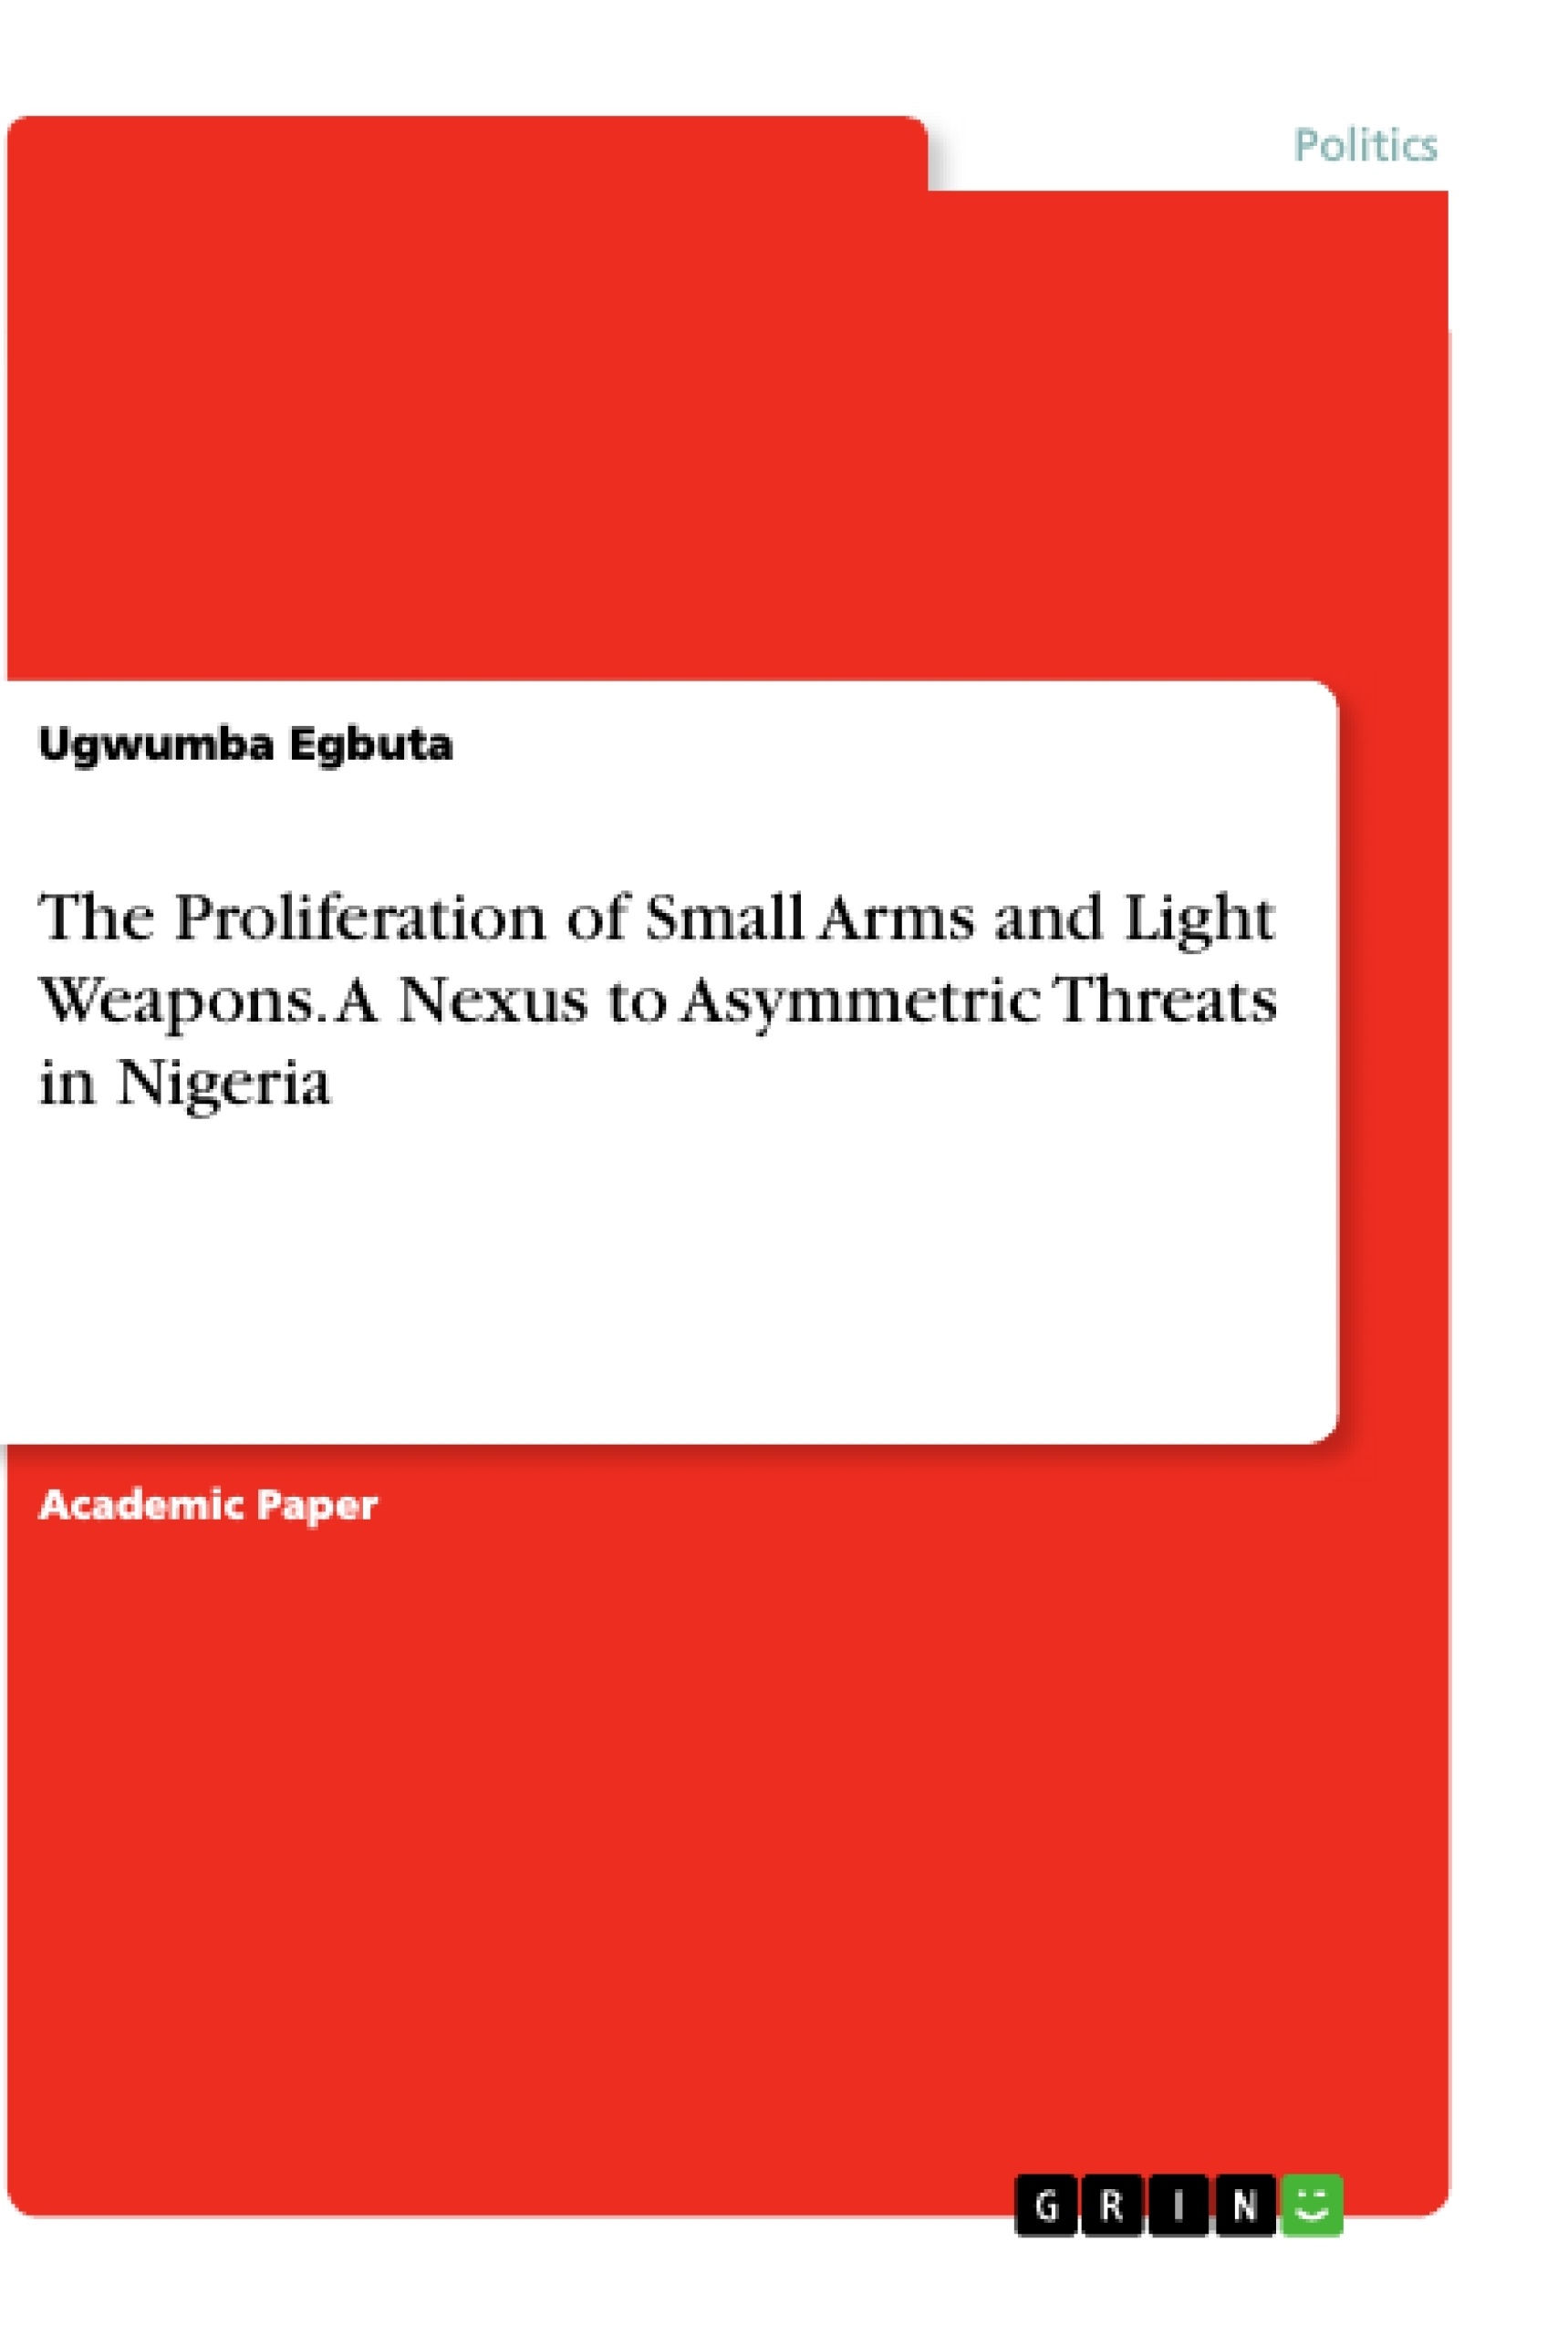 Titre: The Proliferation of Small Arms and Light Weapons. A Nexus to Asymmetric Threats in Nigeria